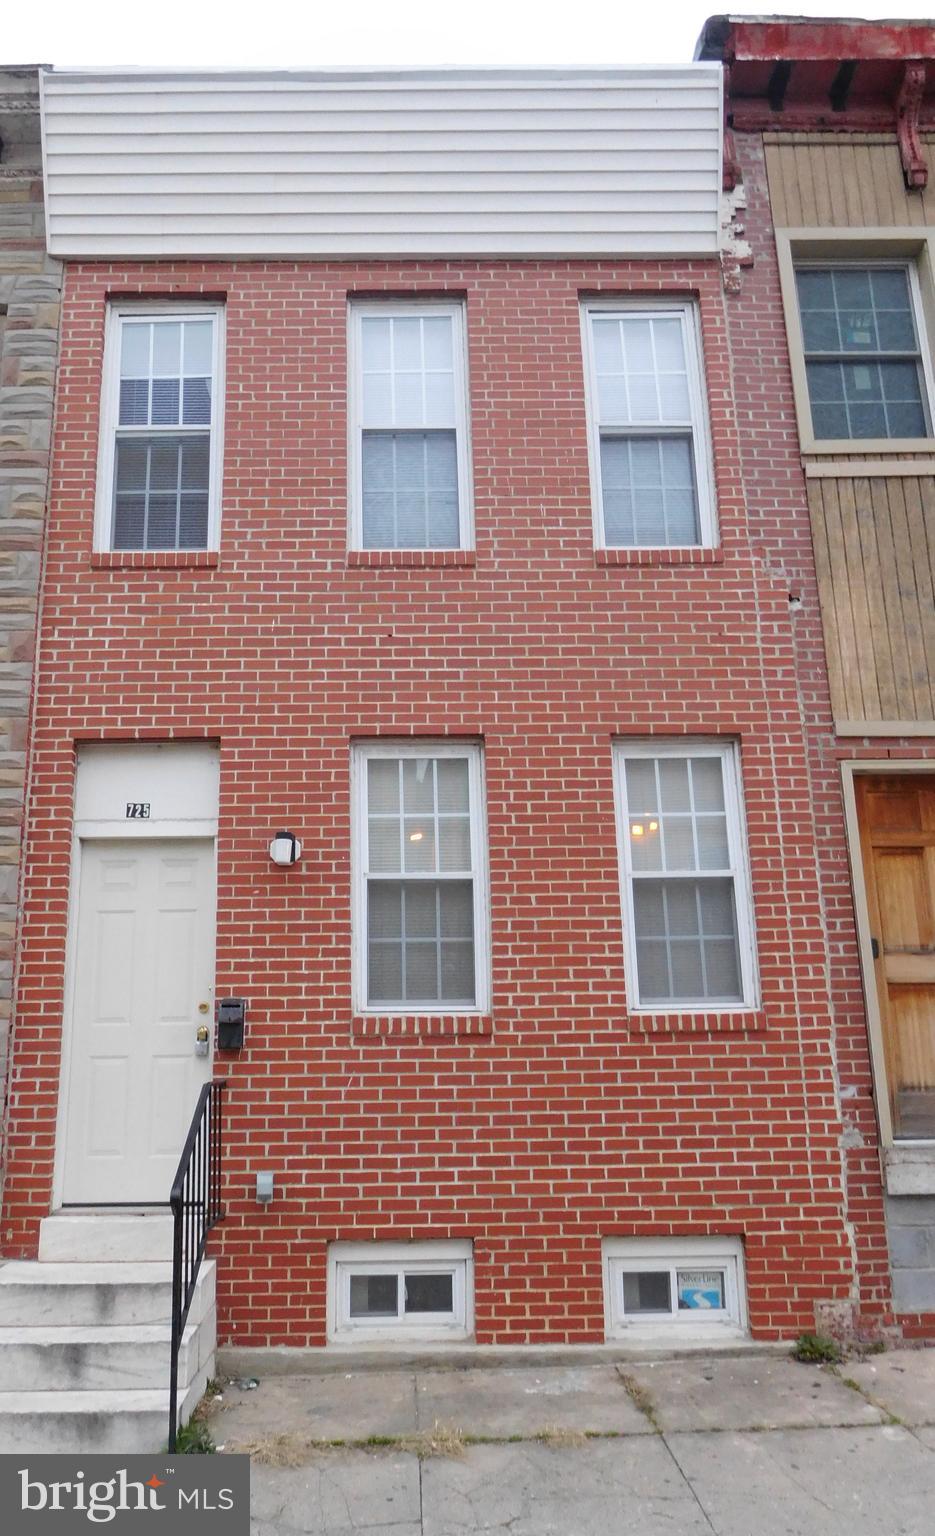 a red brick building that has lot of windows on it